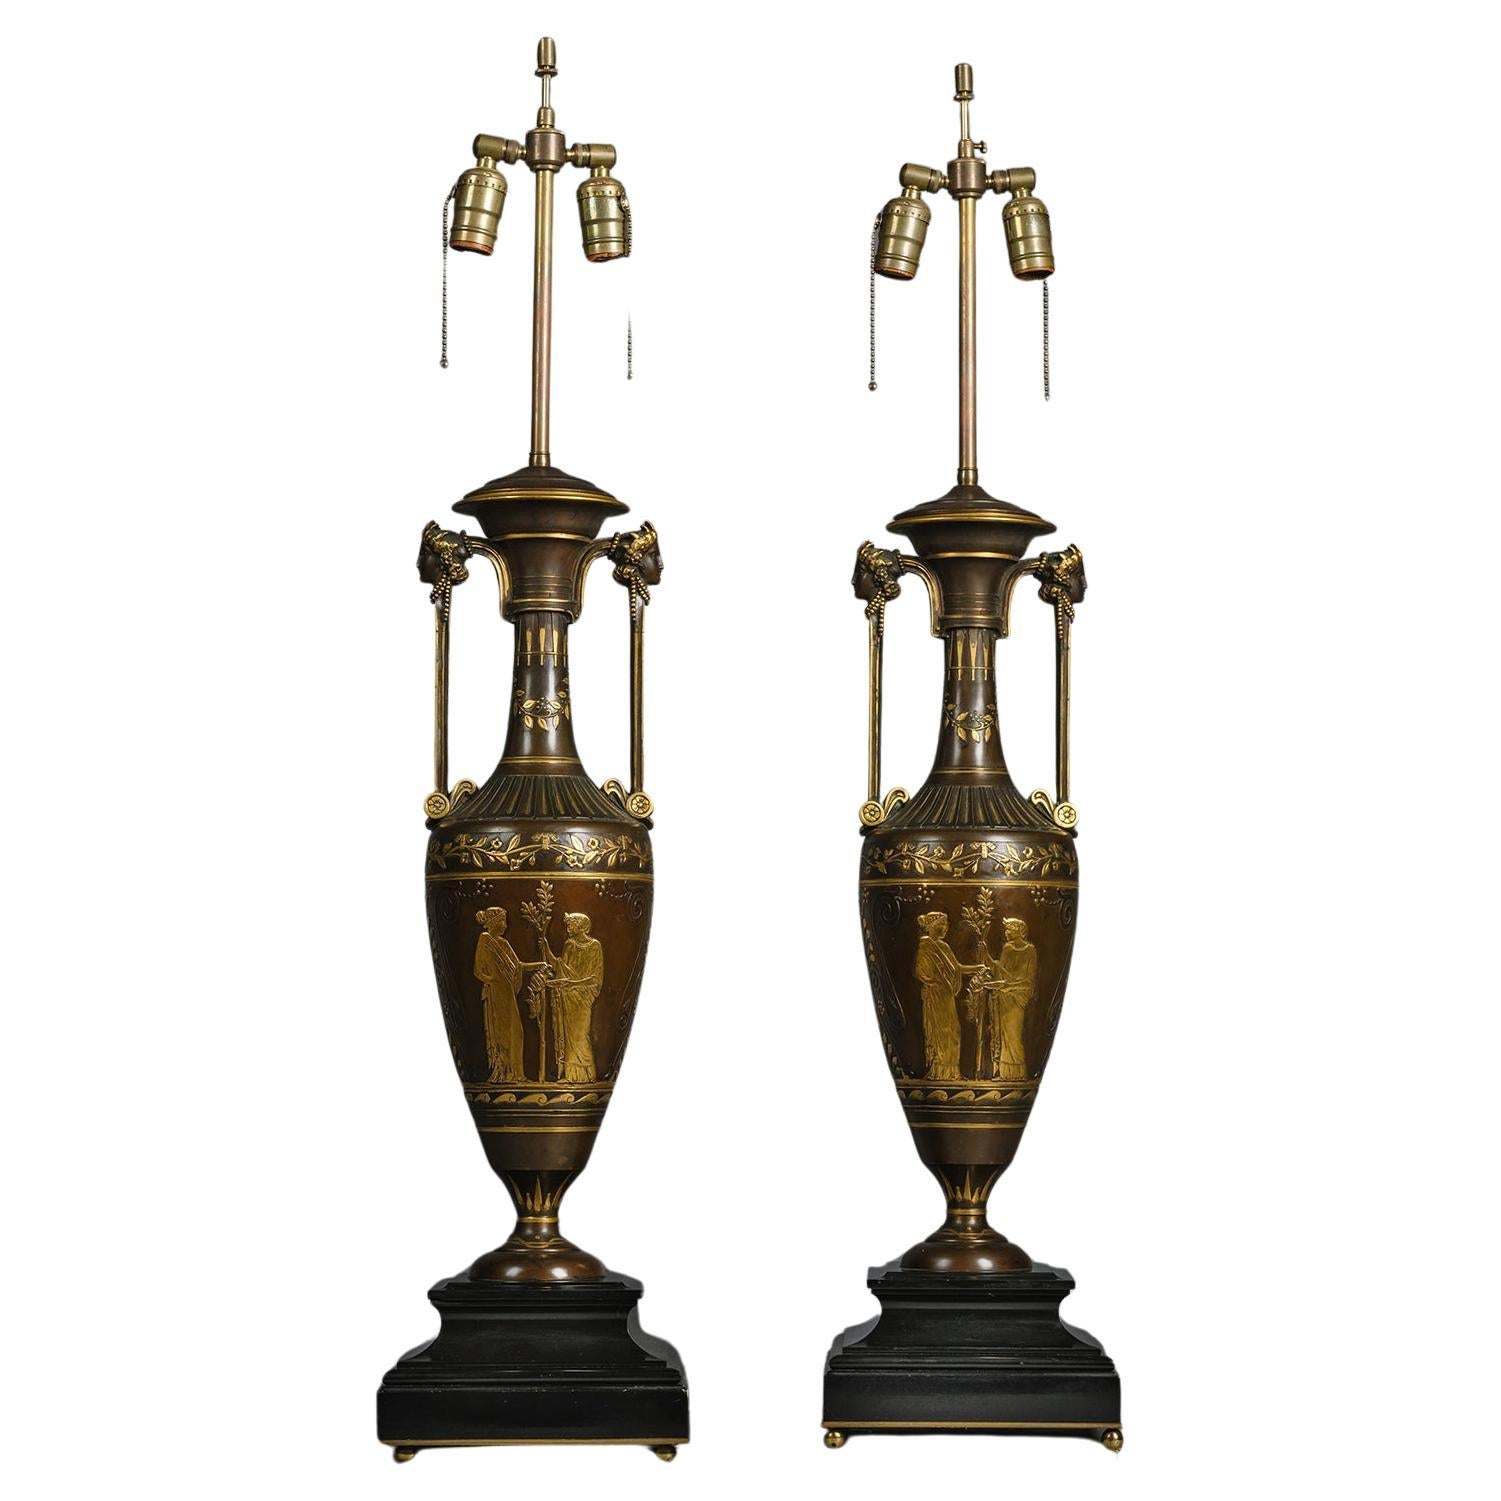 A Pair of Néo-Grec Parcel-Gilt Patinated Bronze Vases Mounted as Lamps